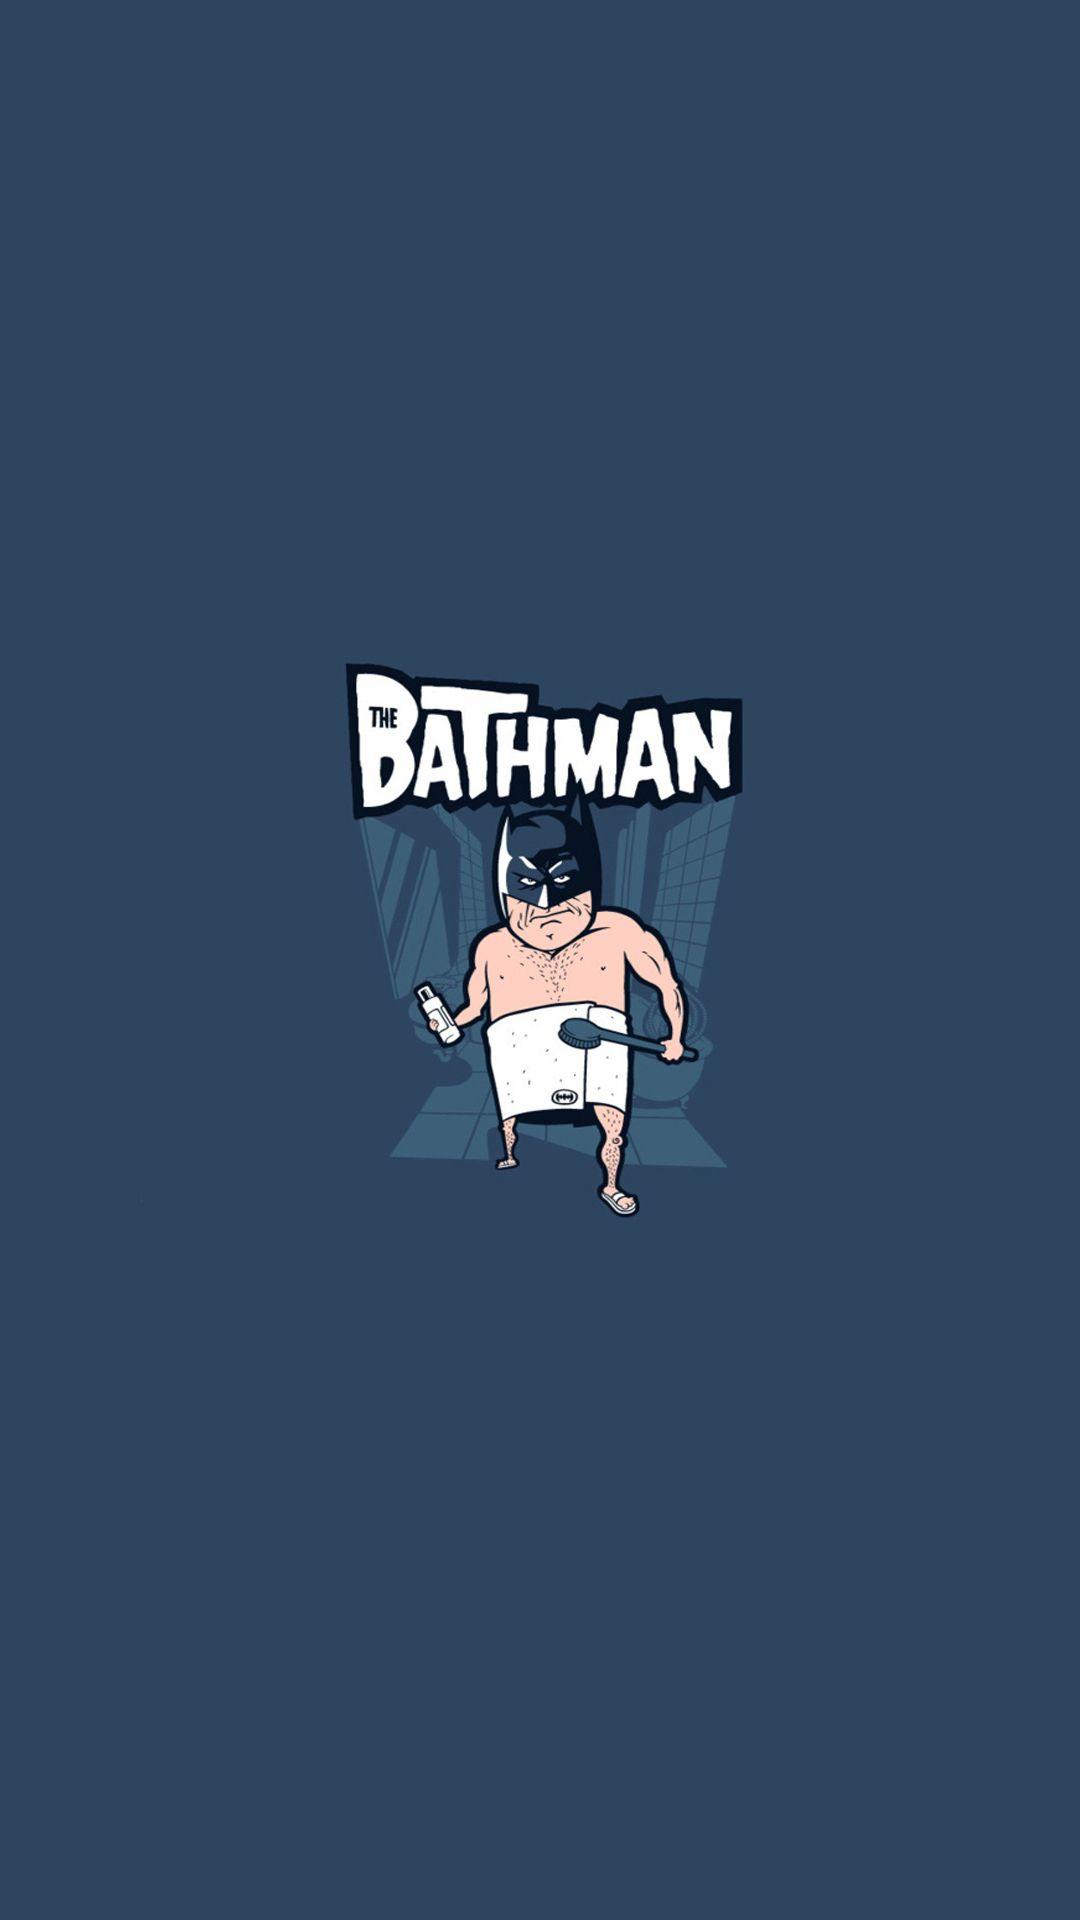 Funny Bathman htc one wallpaper, free and easy to download